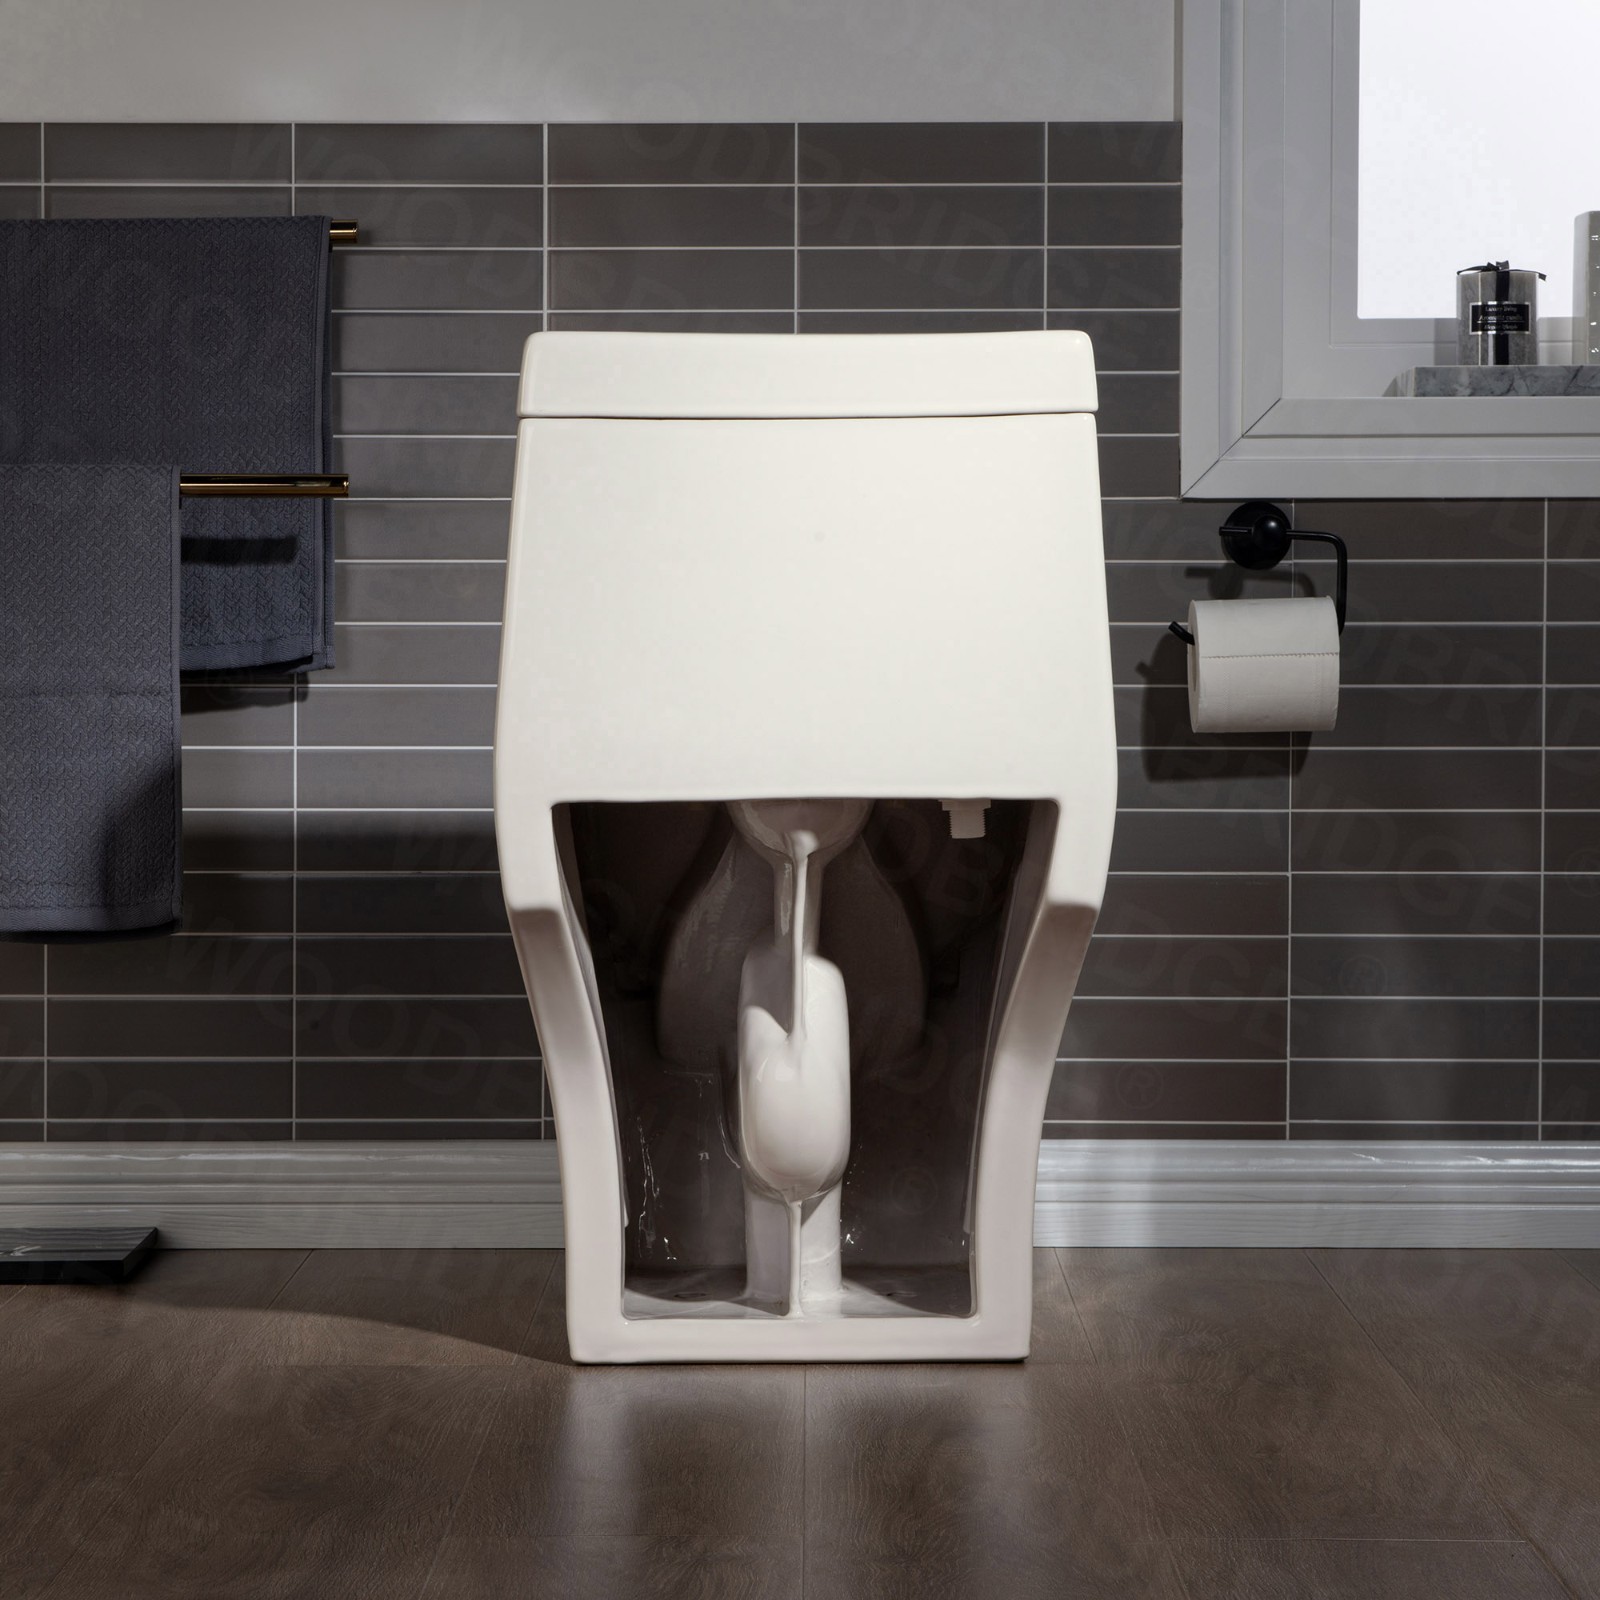  WOODBRIDGEE One Piece Toilet with Soft Closing Seat, Chair Height, 1.28 GPF Dual, Water Sensed, 1000 Gram MaP Flushing Score Toilet, B0942, Biscuit_5370